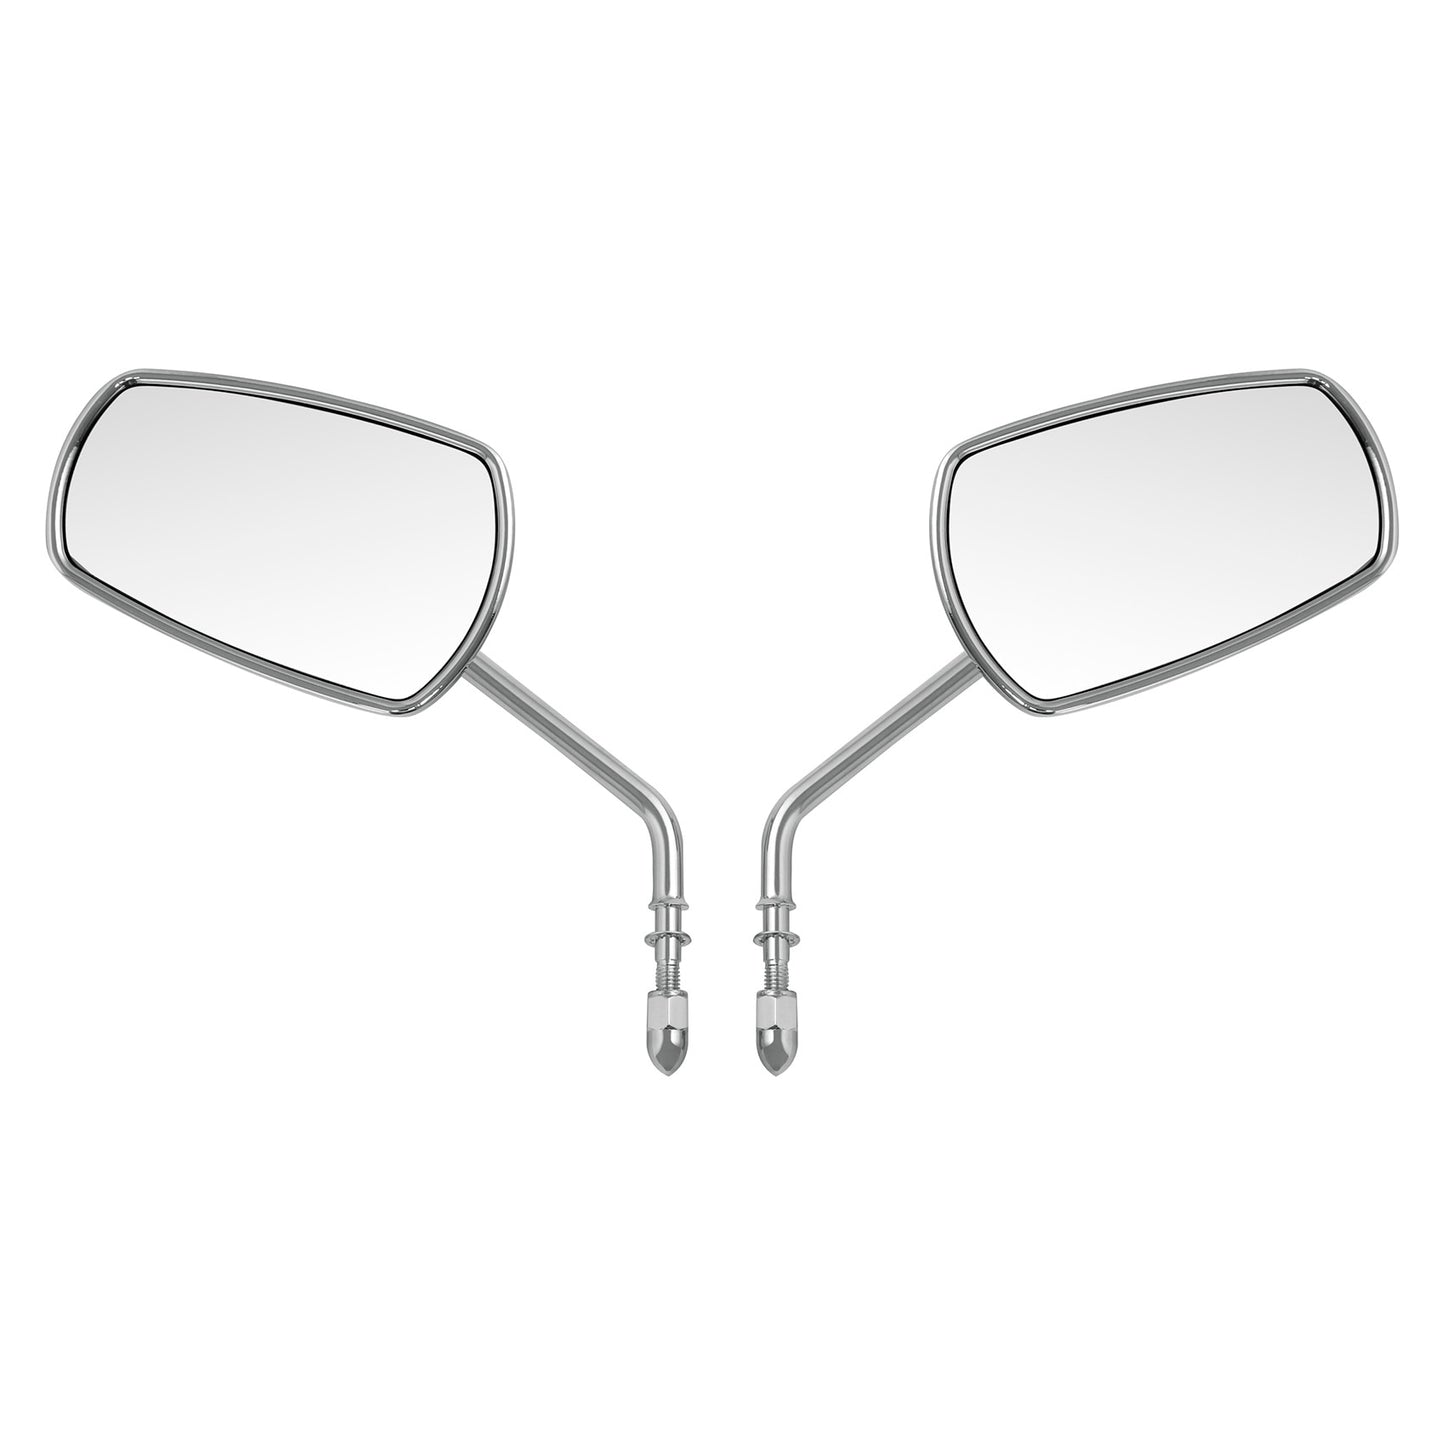 Voodoo Cycle House Custom Mirrors For Harley-Davidson & Custom Applications Sportster Dyna Softail Touring Road King Street Glide